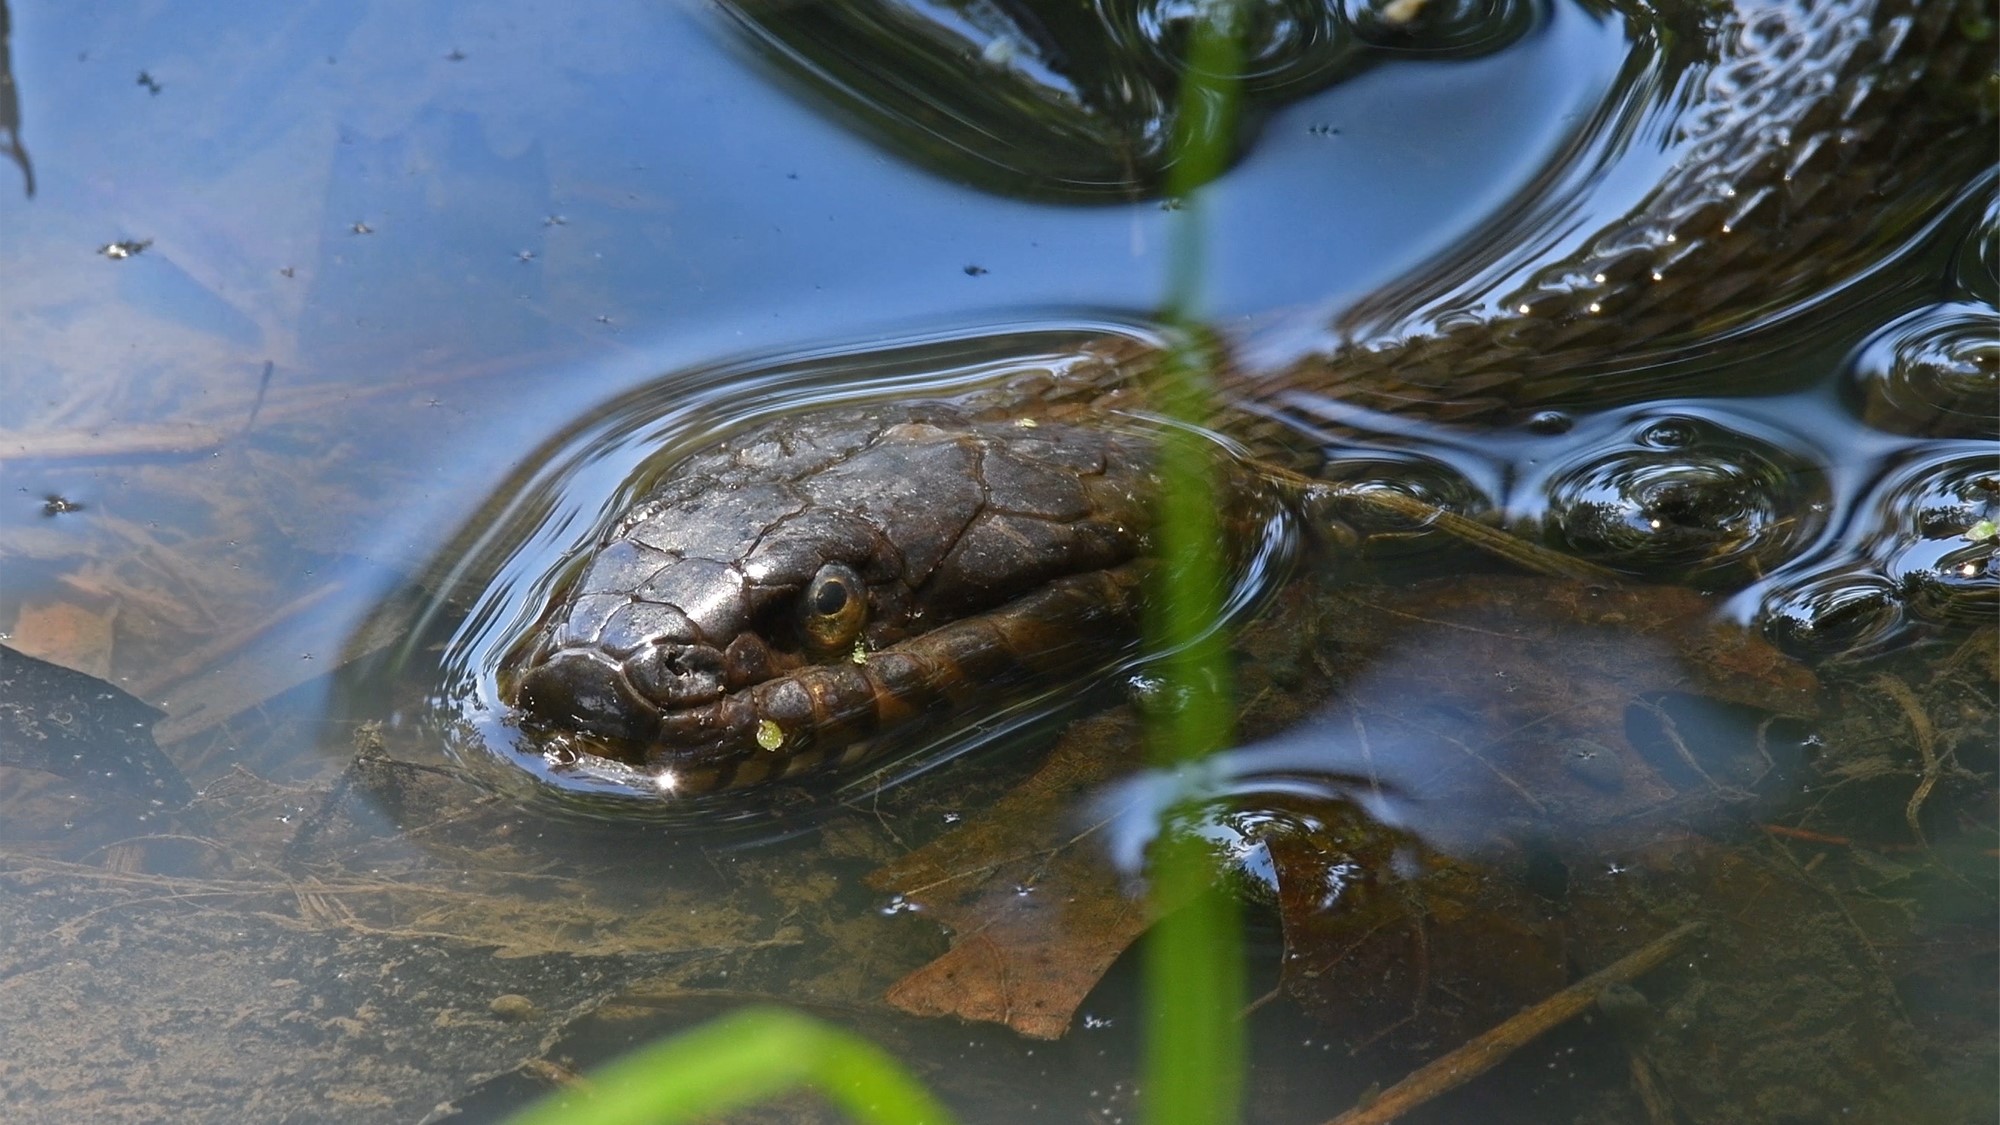 A northern water snake poking out of the water.